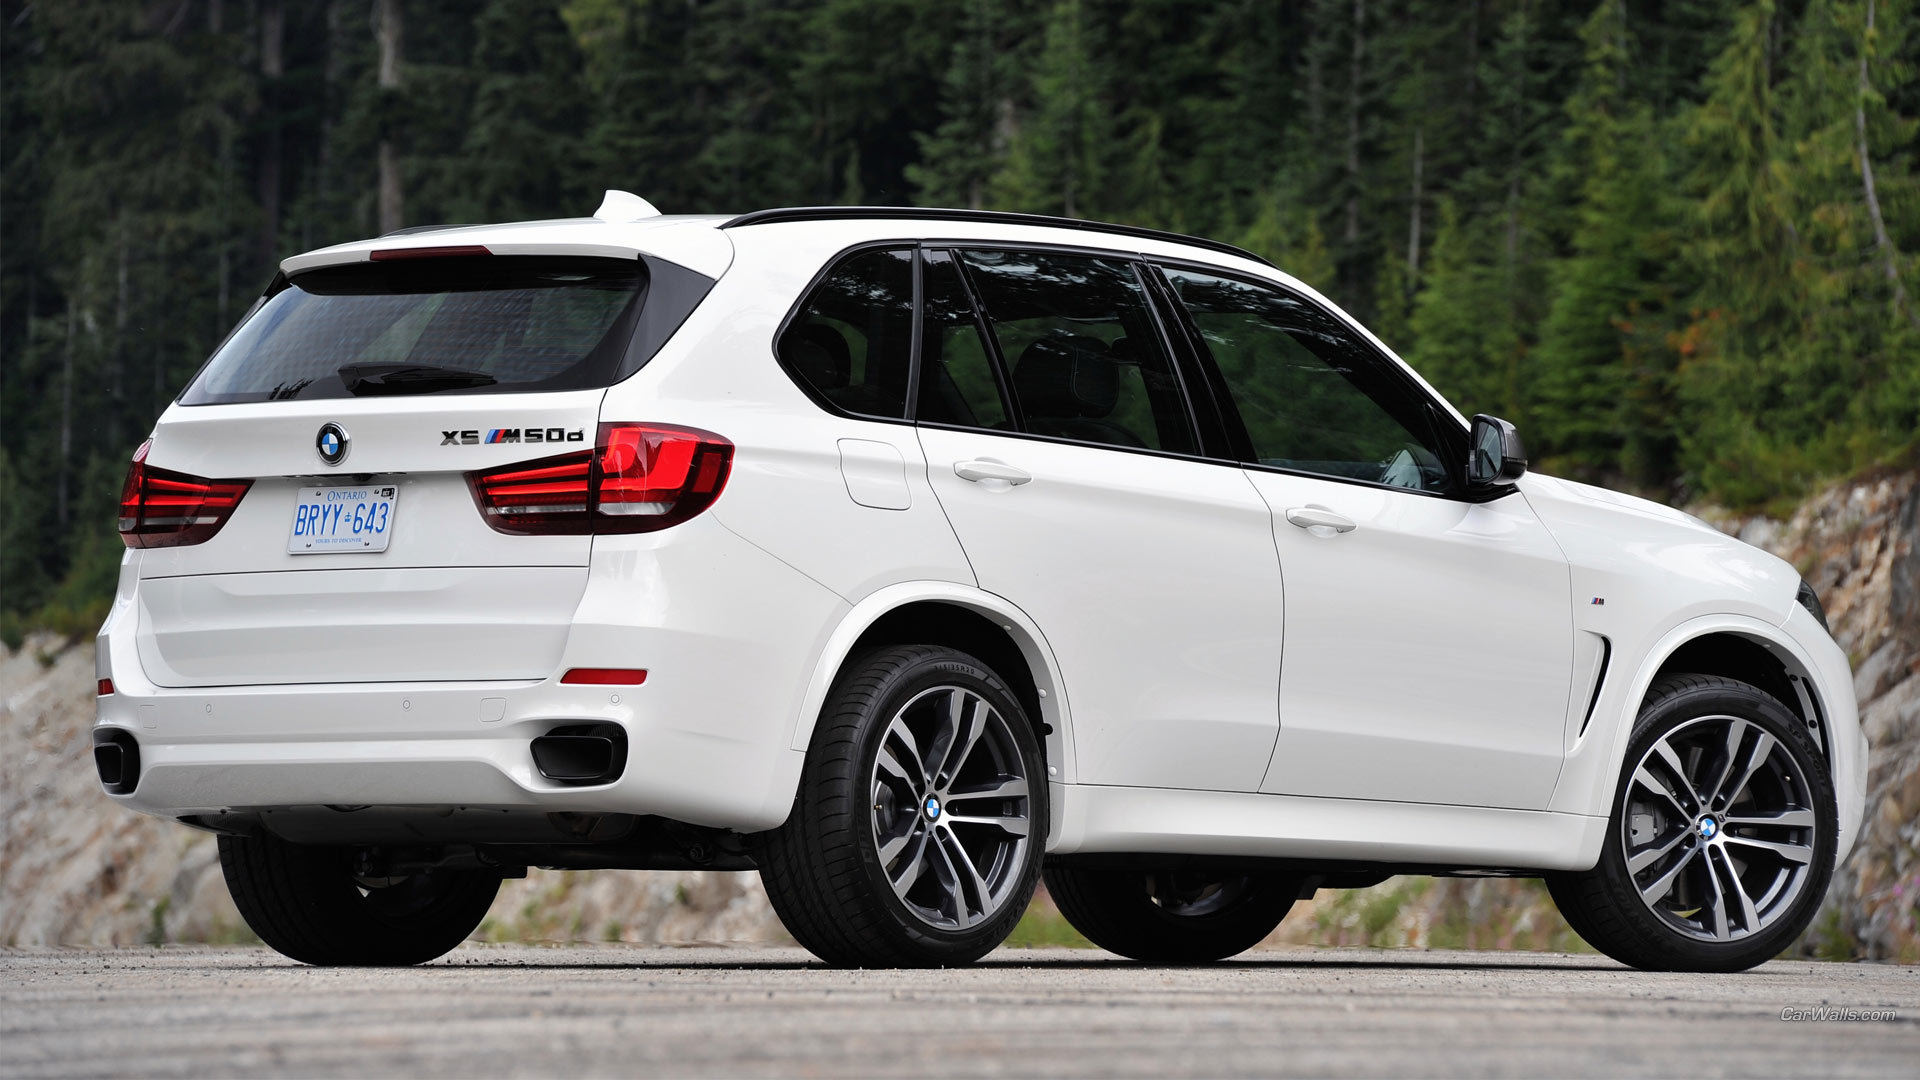 Awesome BMW X5 free wallpaper ID:163200 for full hd 1080p computer